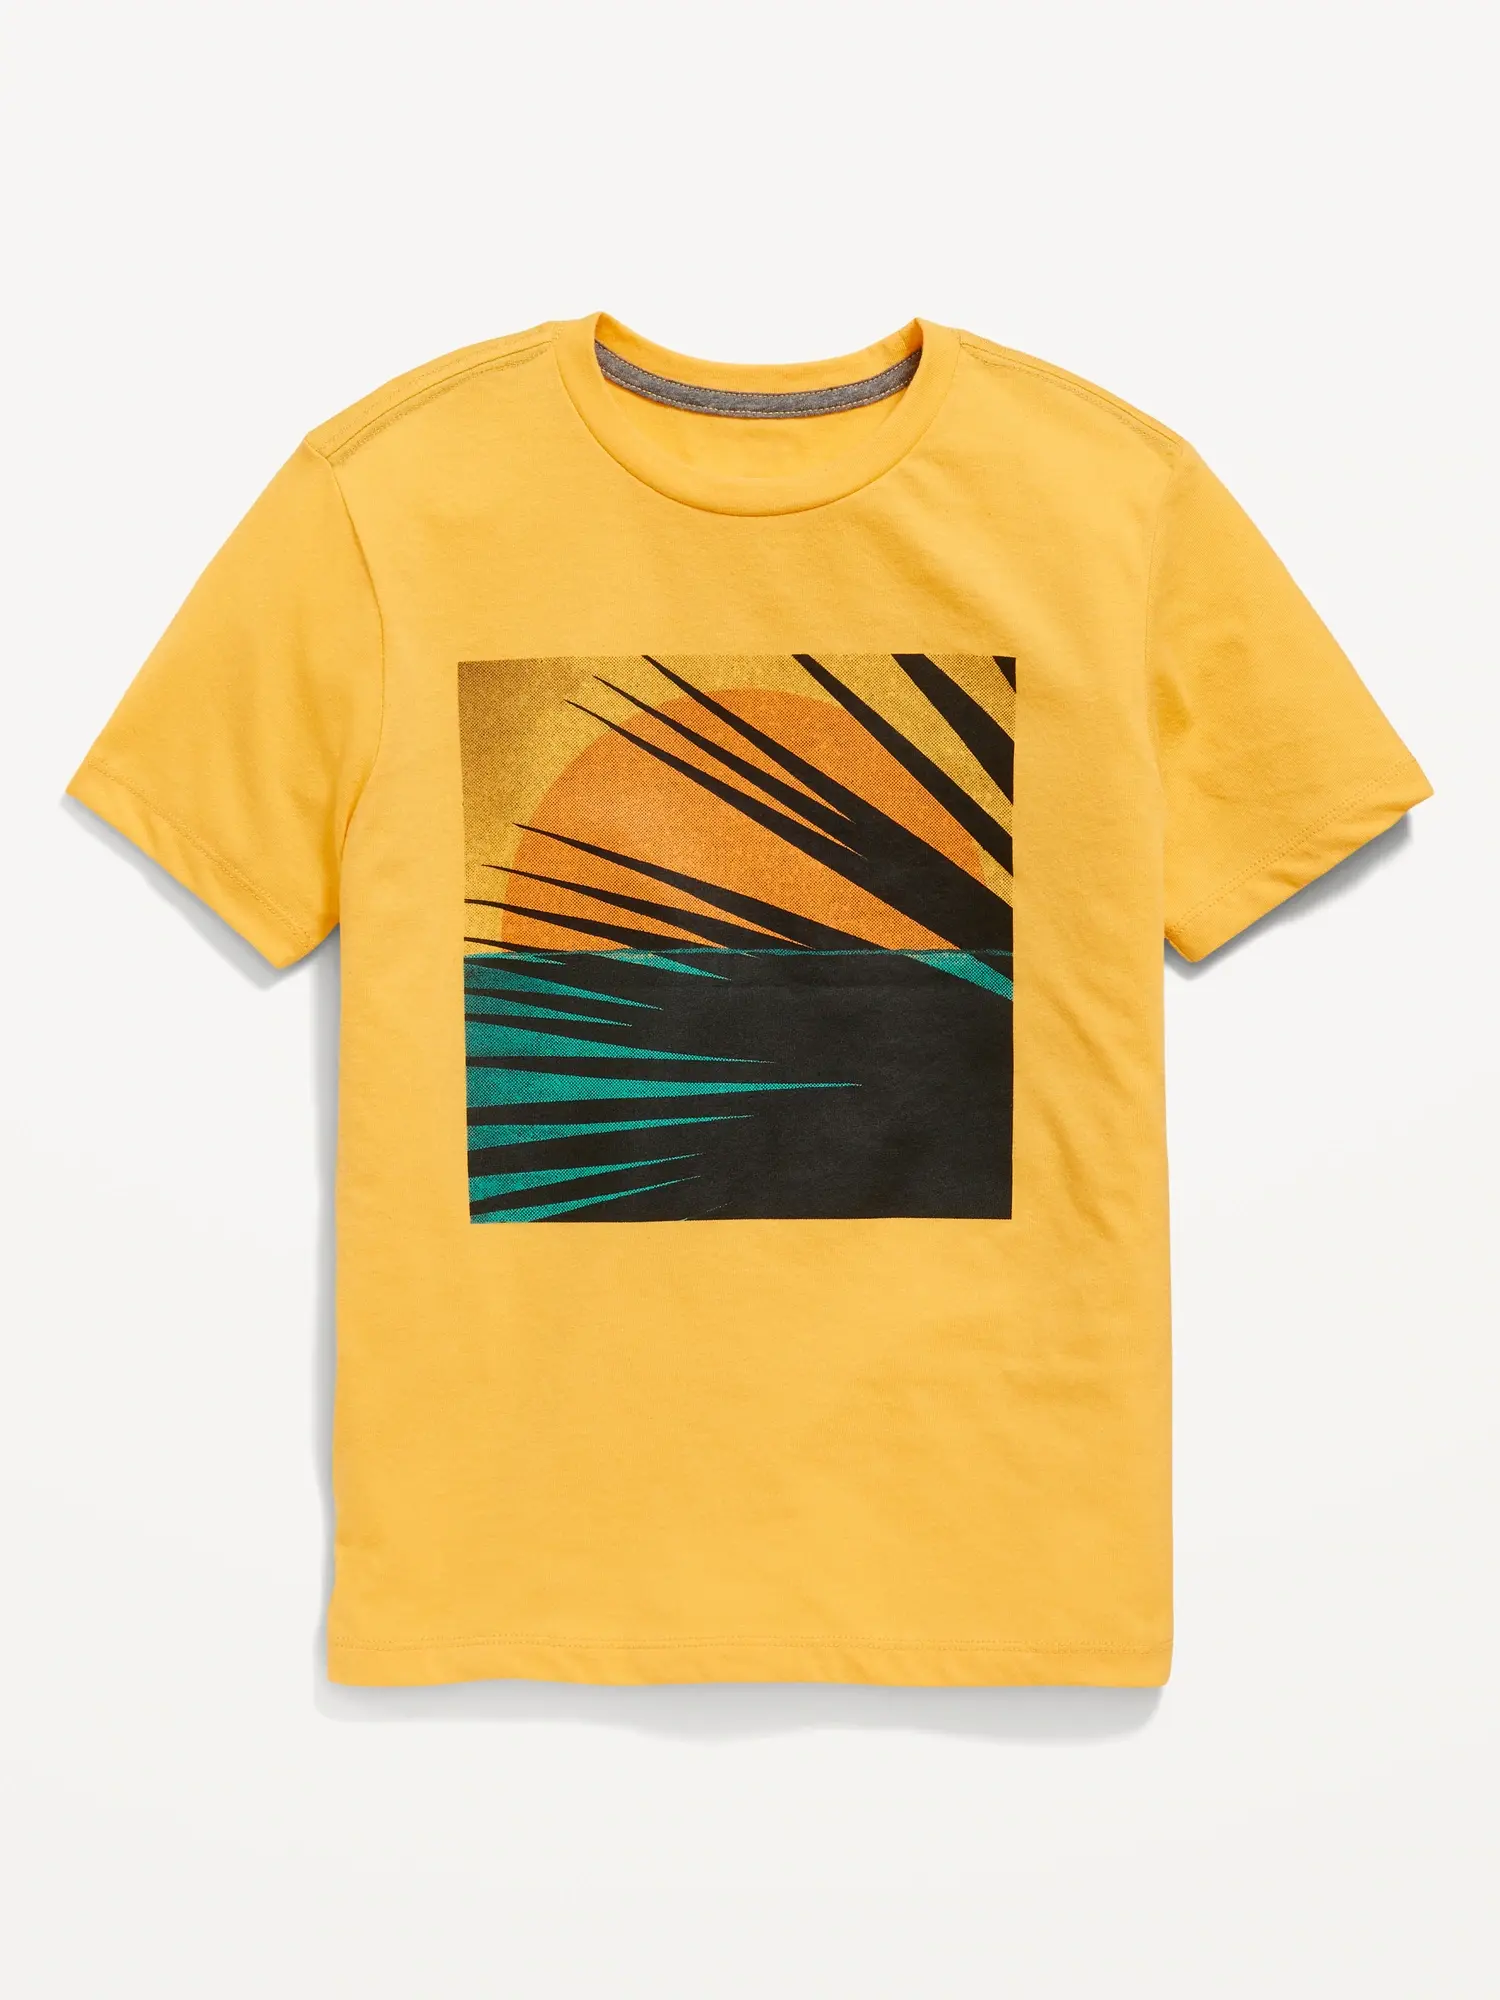 Old Navy Short-Sleeve Graphic T-Shirt for Boys yellow. 1